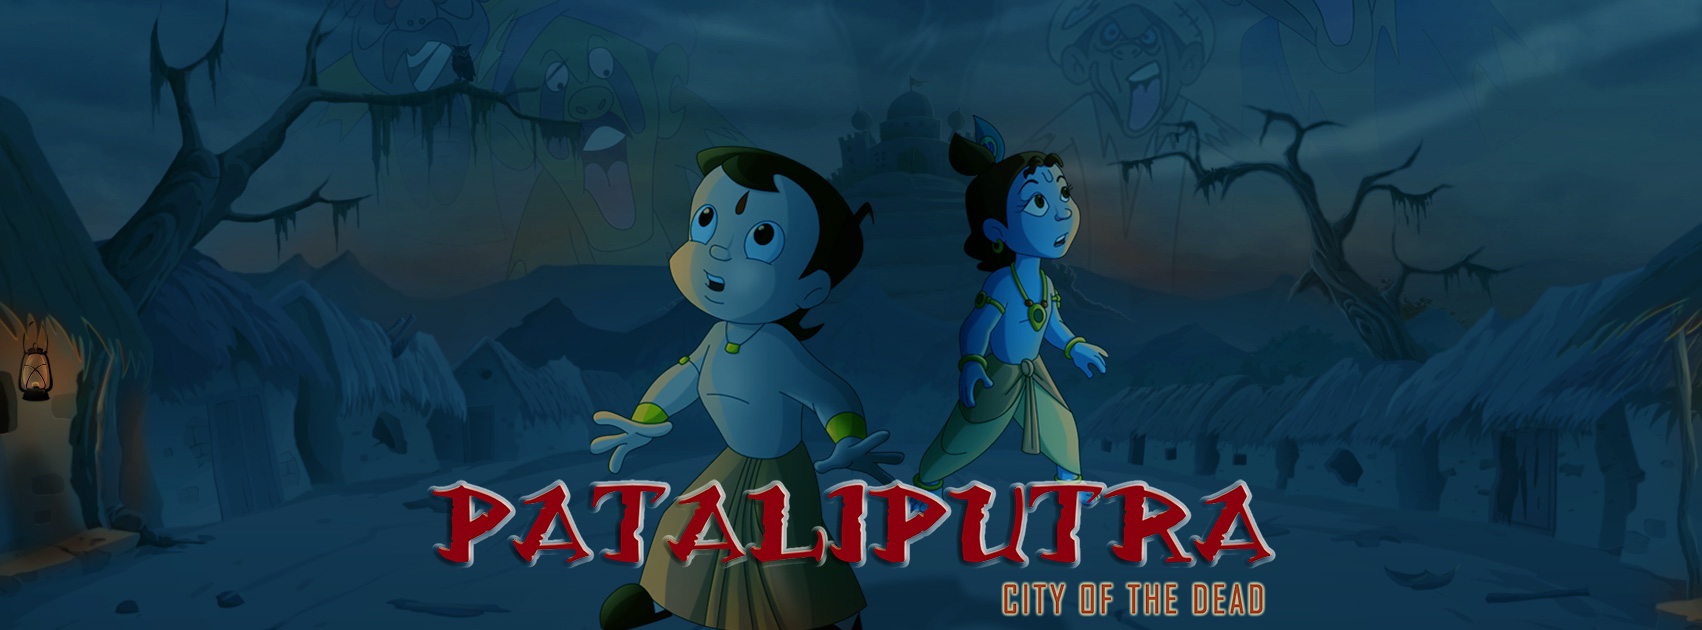 Pataliputra - City Of The Dead